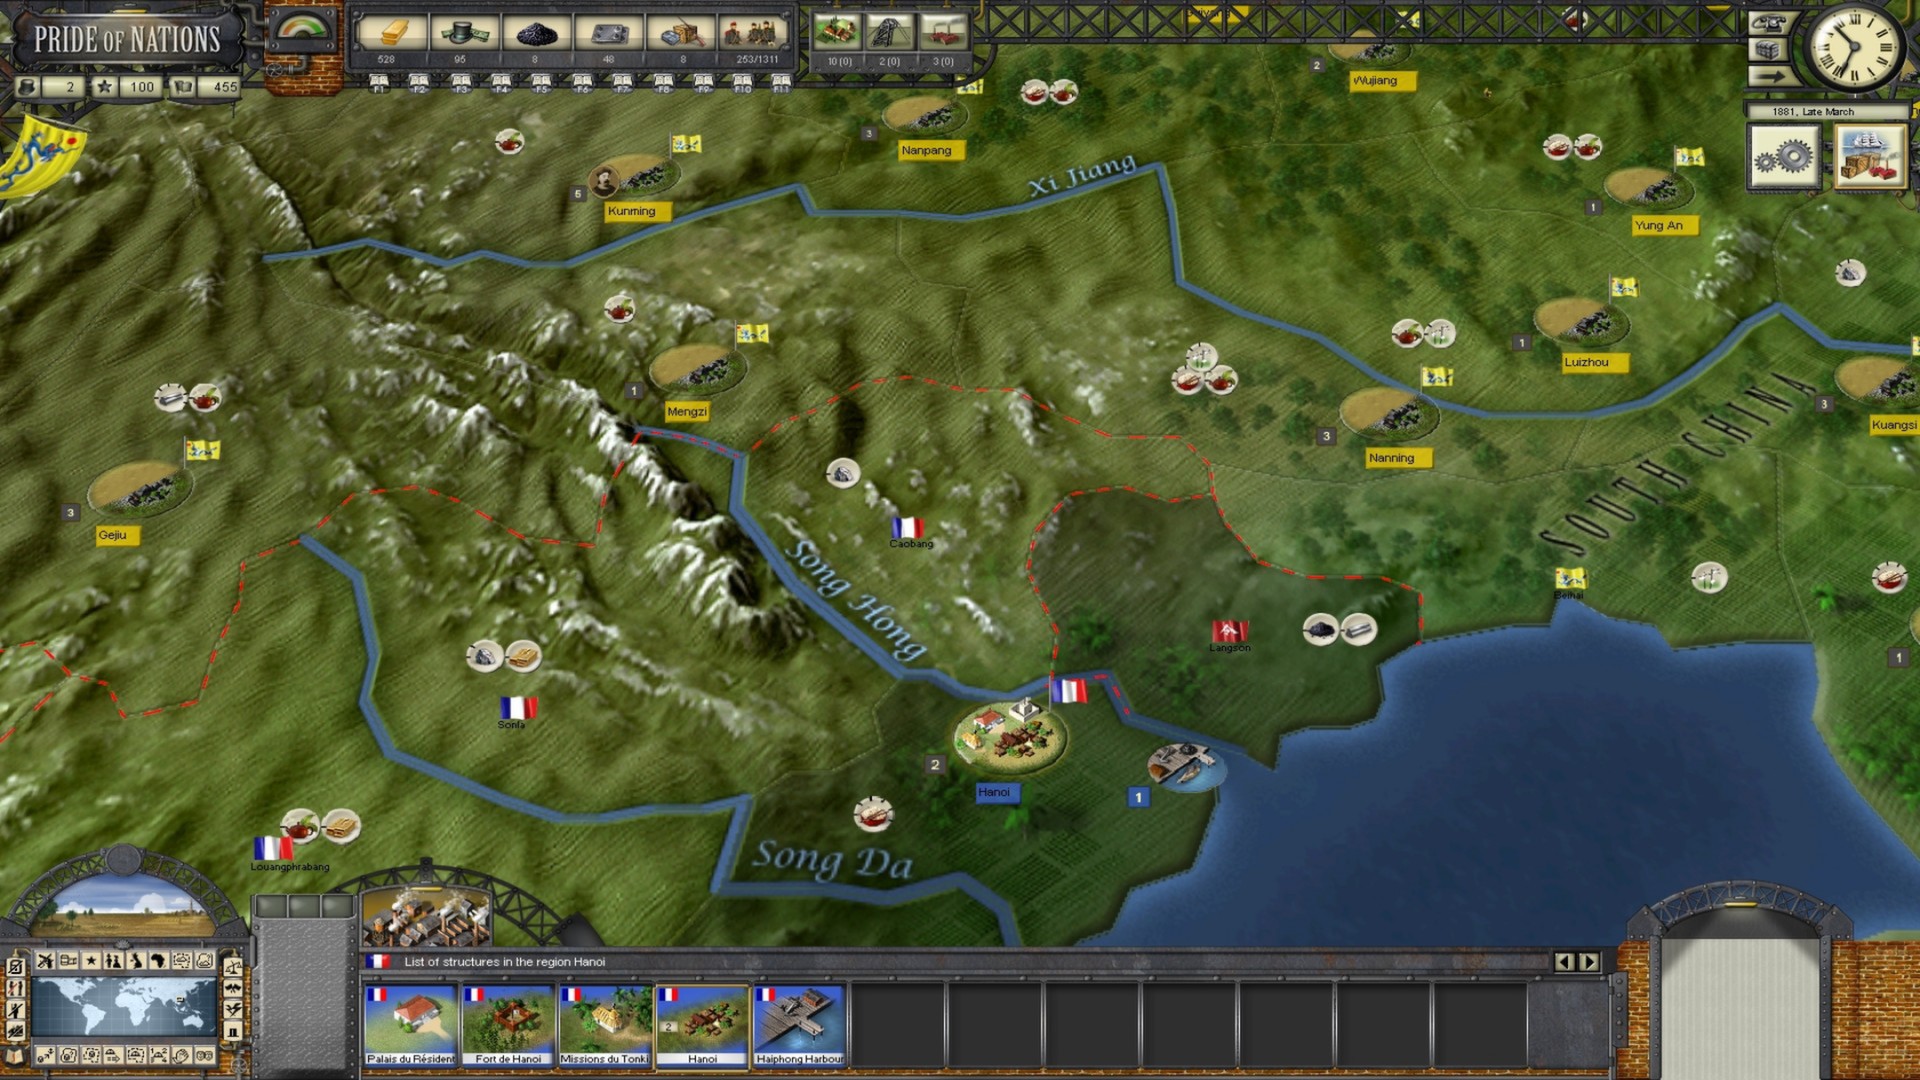 Pride of Nations - The Scramble for Africa DLC Steam CD Key 4.38$